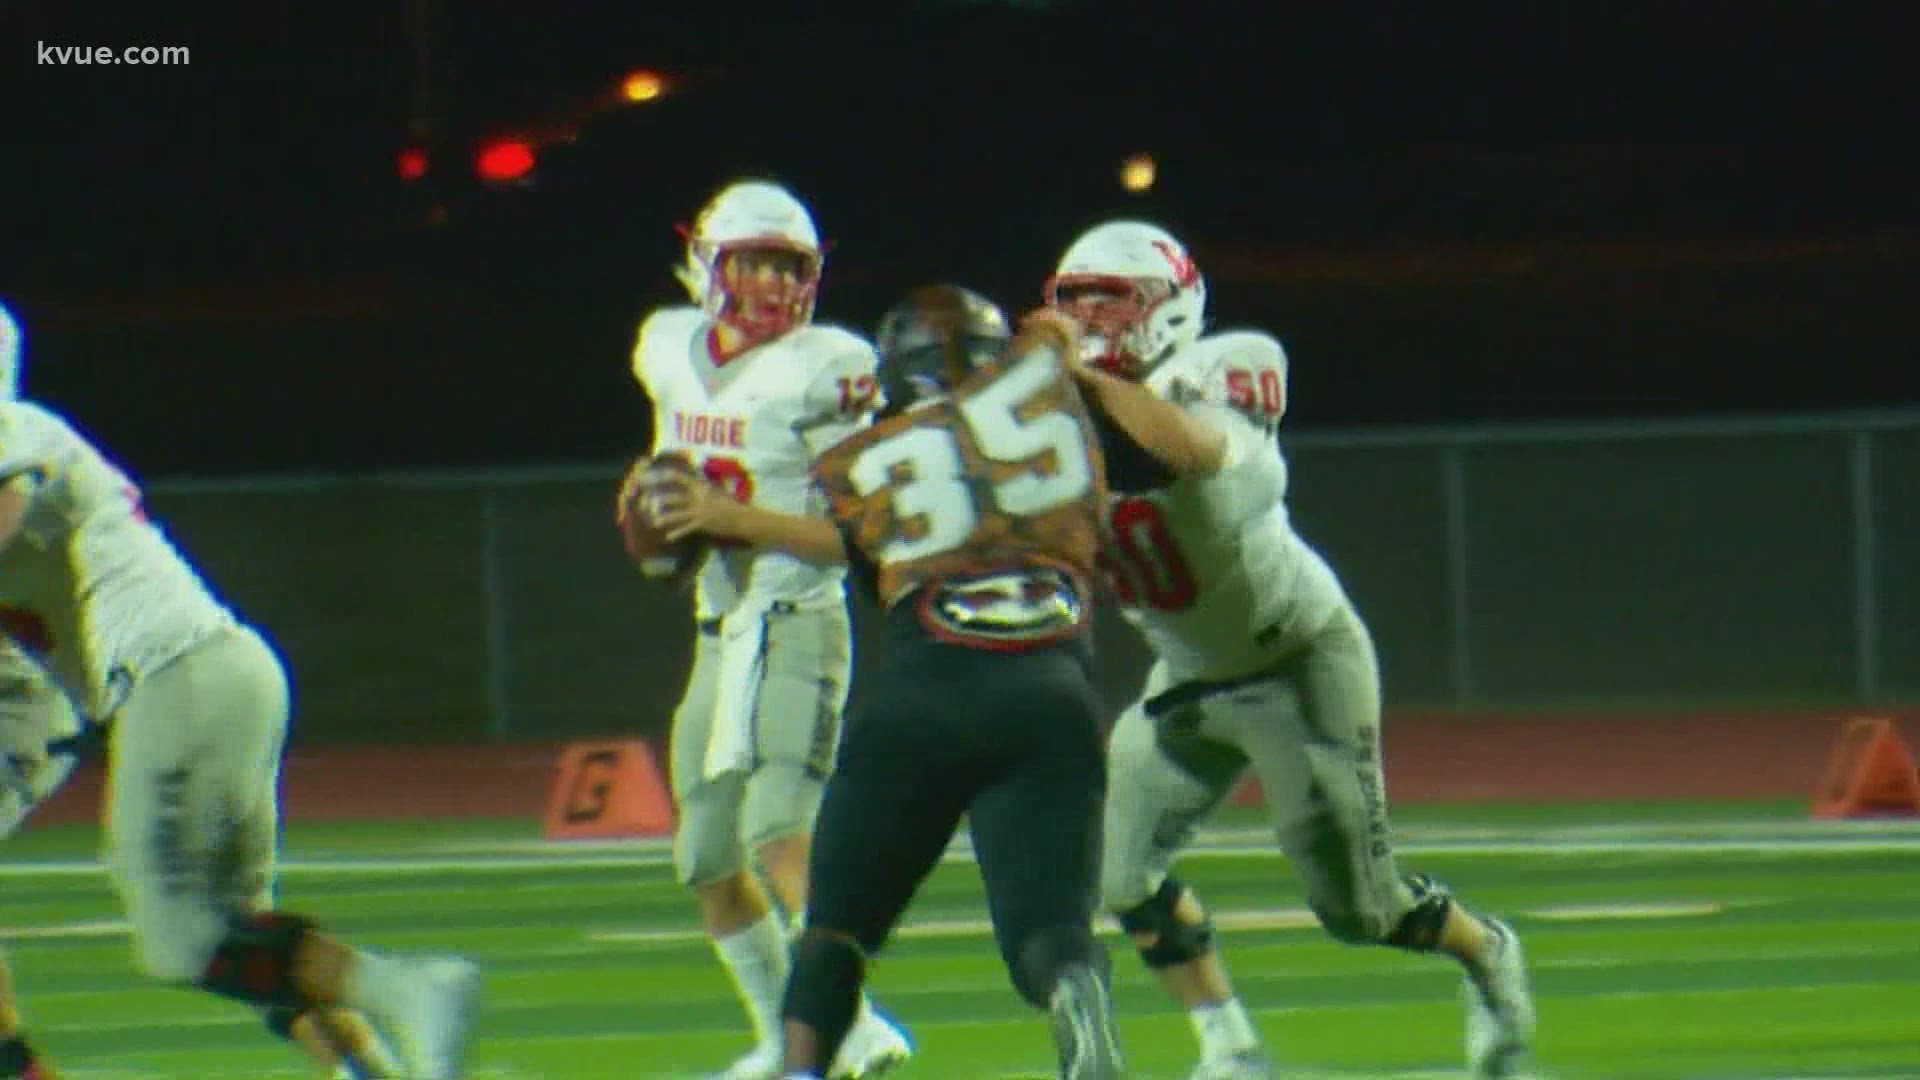 The Hutto Hippos and Vista Ridge Rangers matchup is KVUE's Game of the Week!